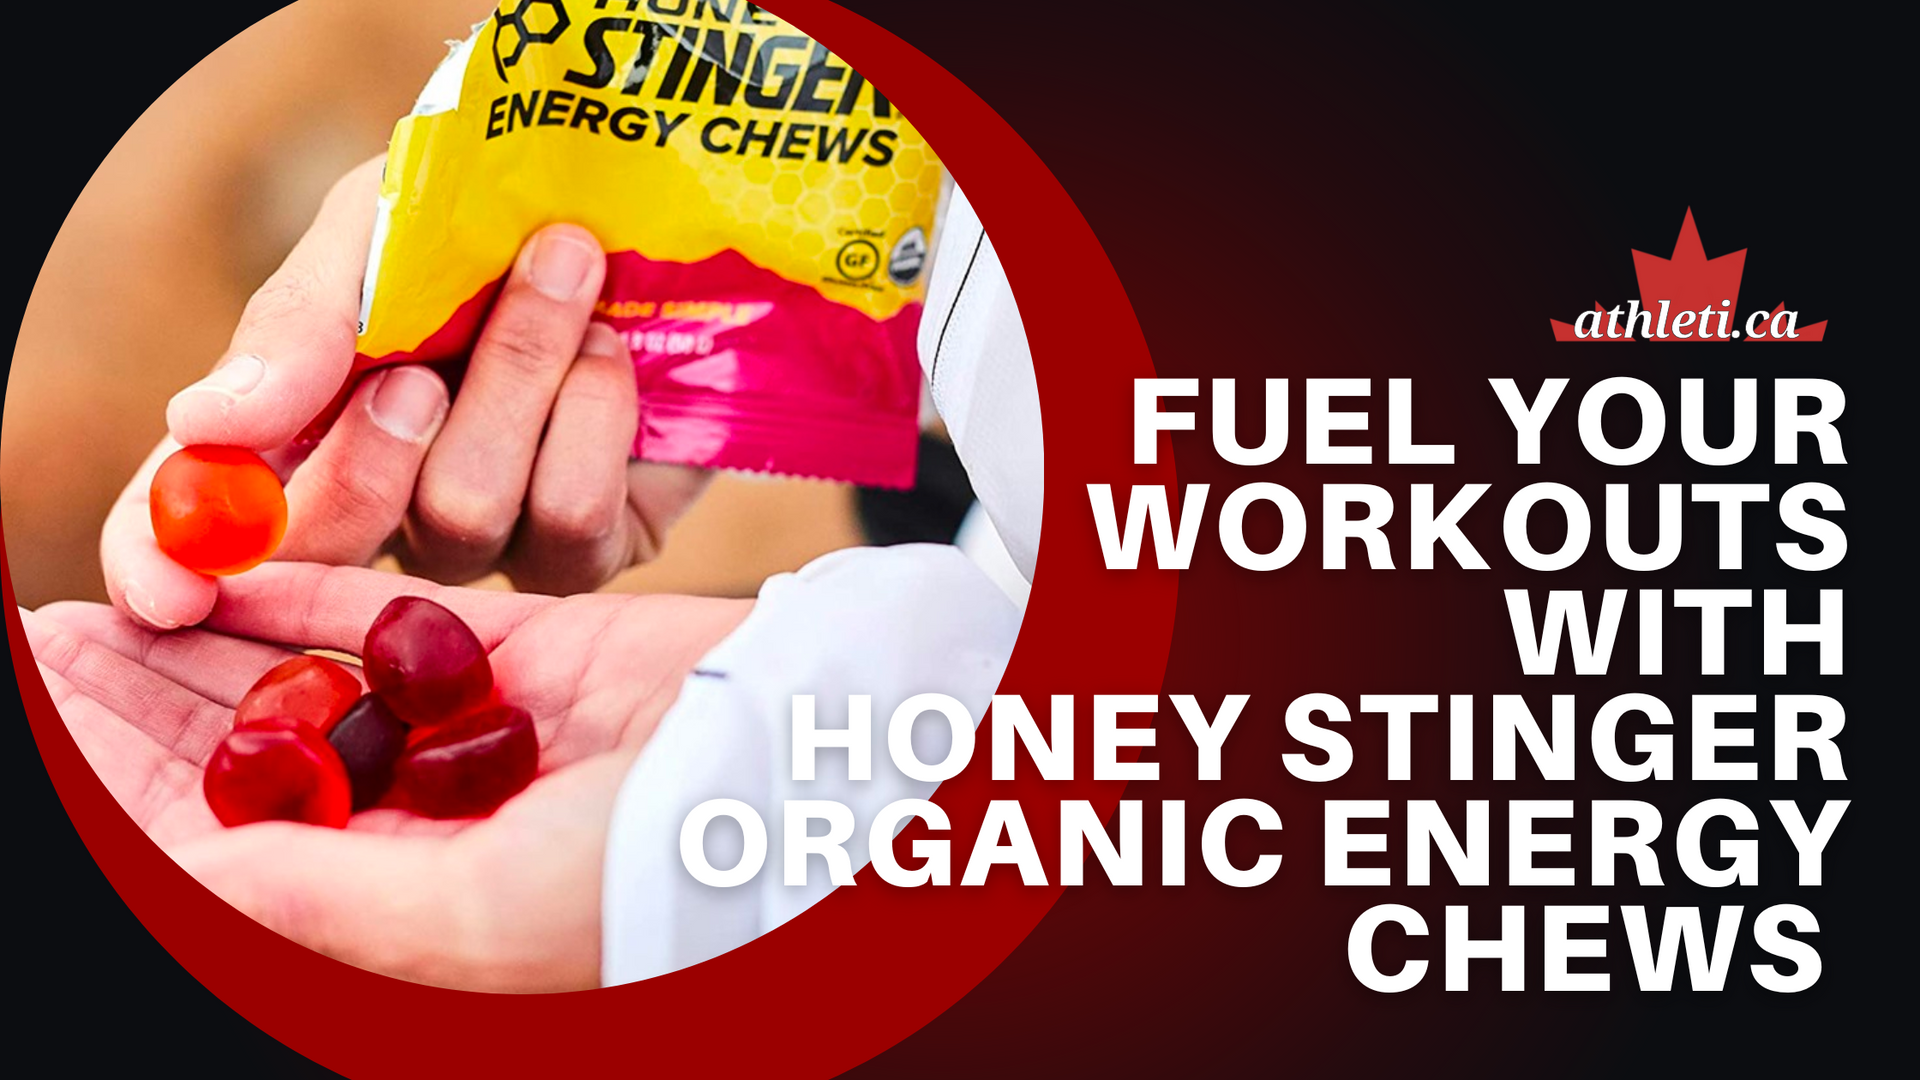 Fuel Your Workouts with Honey Stinger Organic Energy Chews